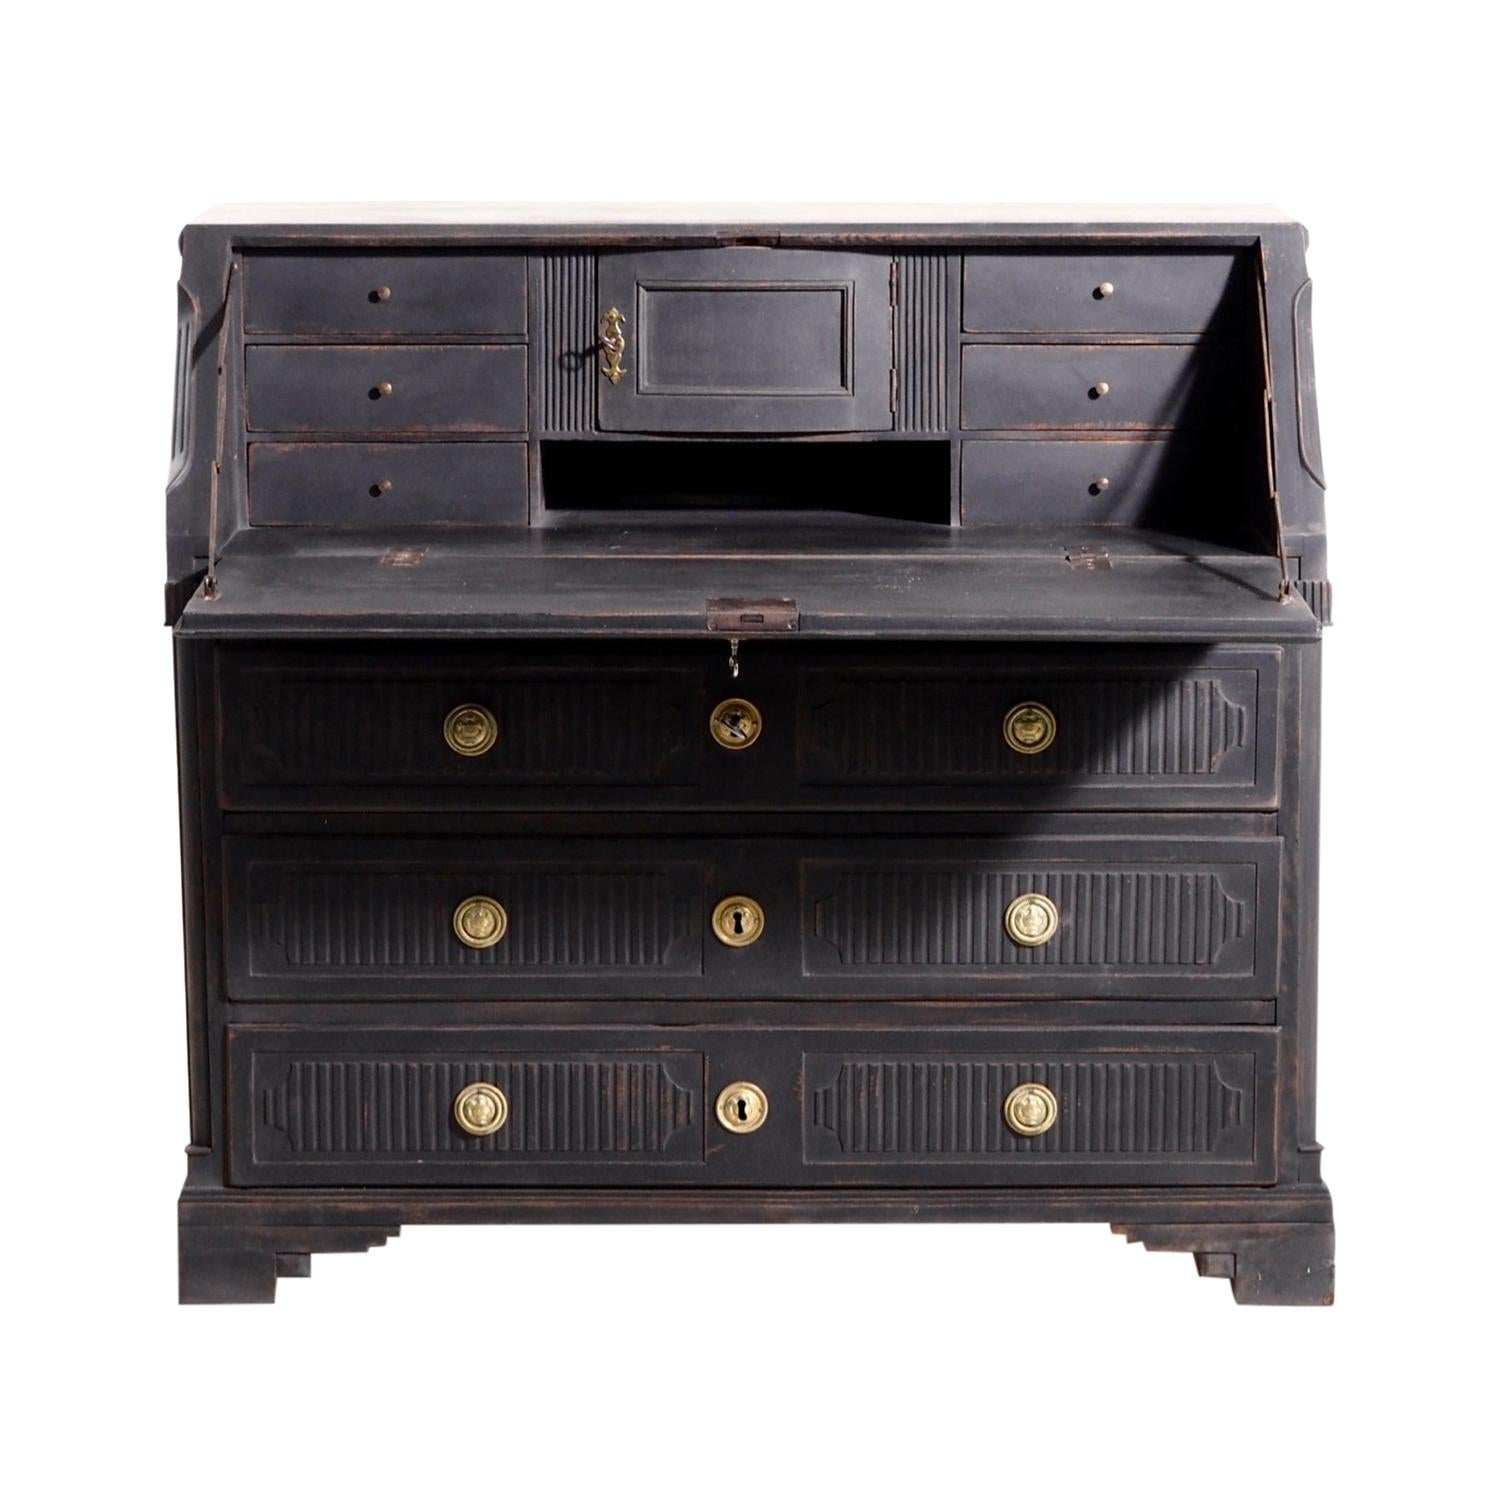 An antique Swedish Gustavian bureau made of hand crafted painted Oakwood, in good condition. The Scandinavian writing table, desk features many small storage drawers within and three large storage drawers. The black, drop front secretaire represents